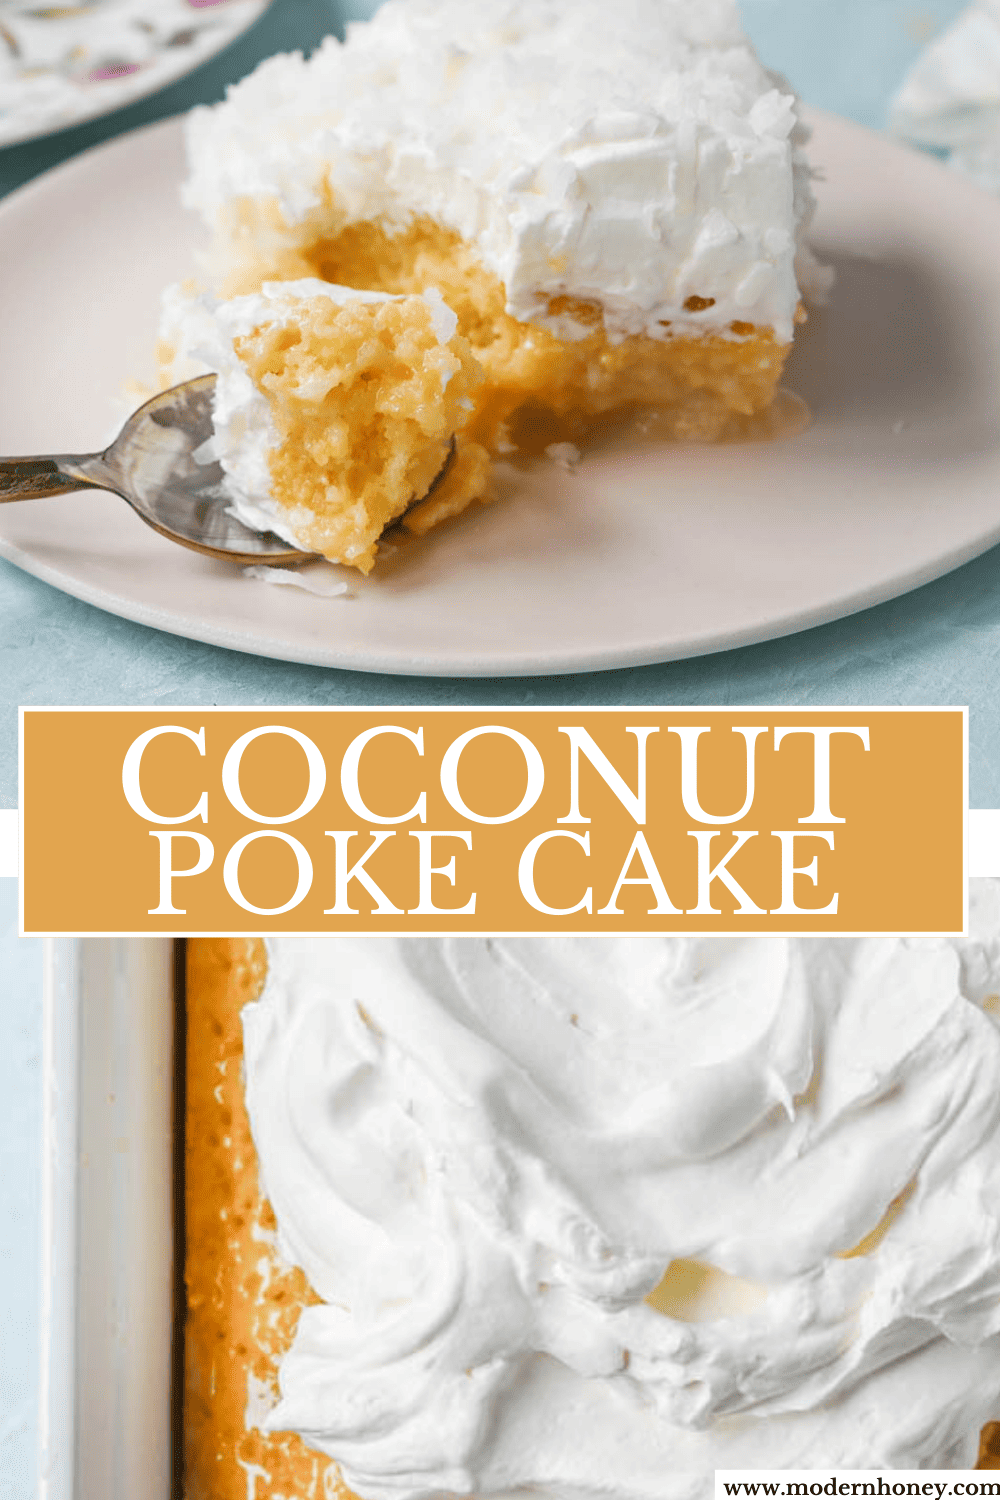 This Coconut Poke Cake is made with a baked cake mix and filled with cream of coconut and sweetened condensed milk and topped with sweet whipped cream and coconut. This Coconut Tres Leches Cake is so easy to make and is perfect for potlucks and parties.